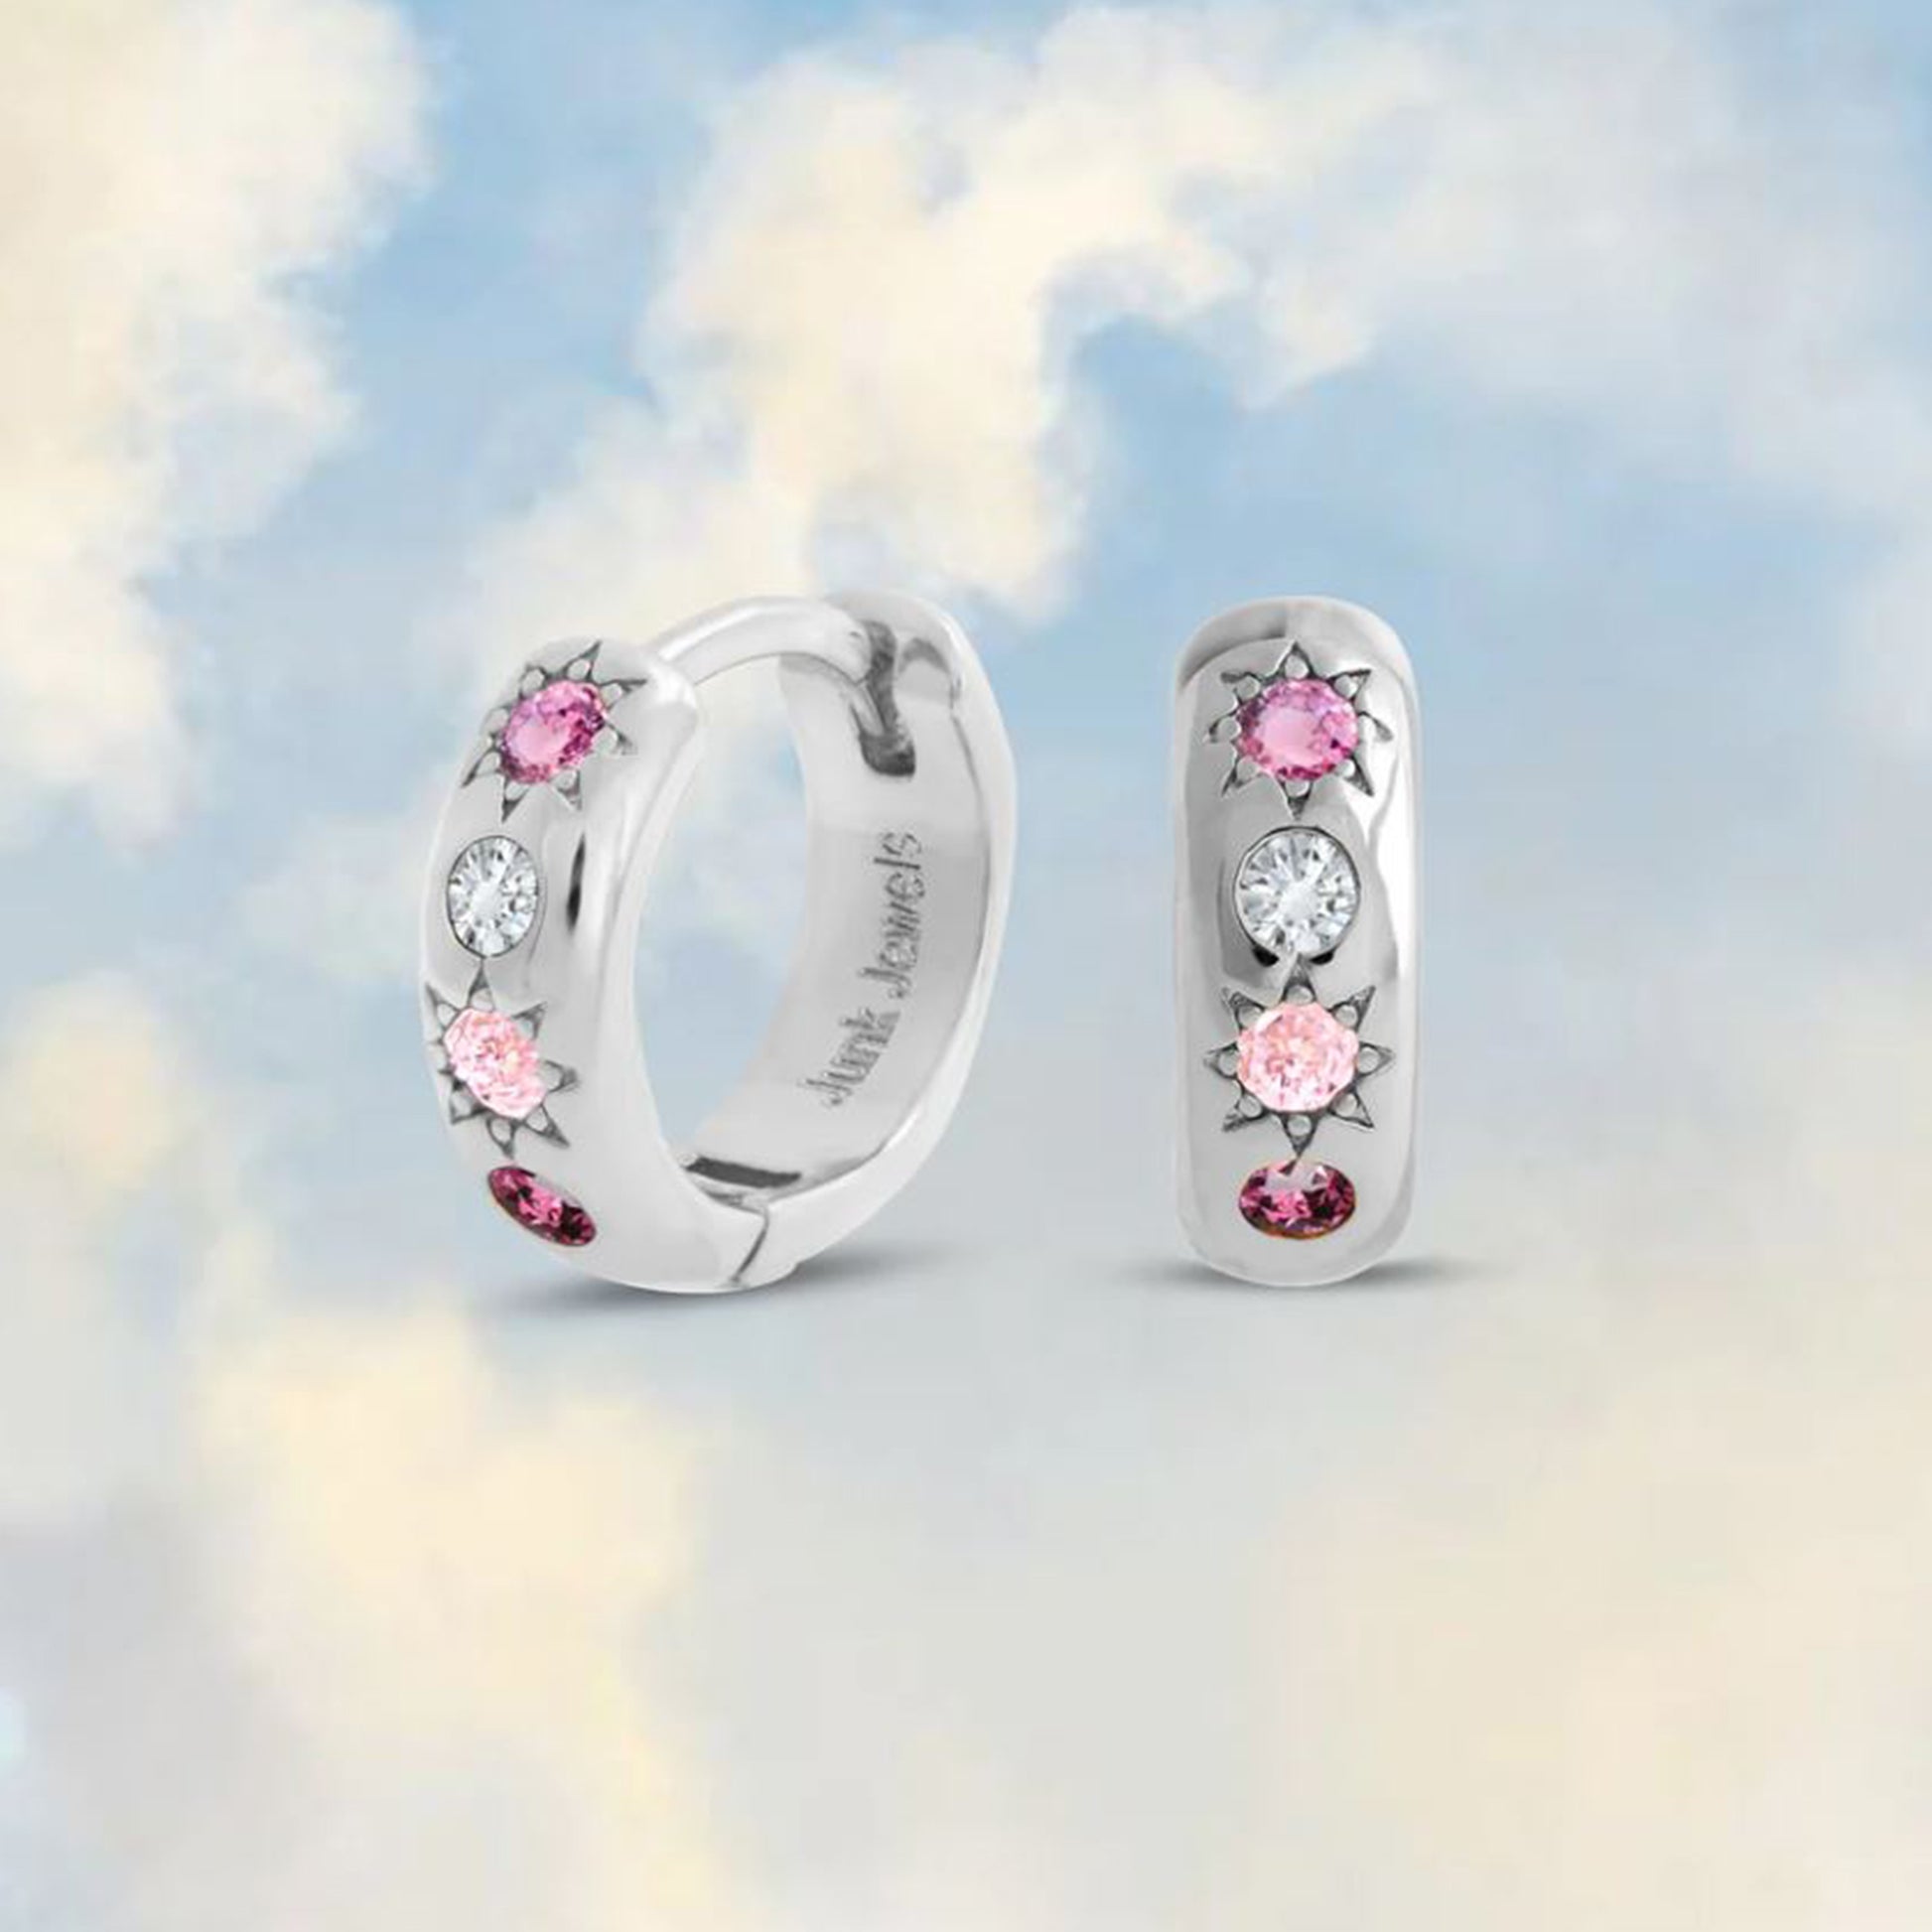 silver huggie hoops with pink gemstones on a cloudy sky background 